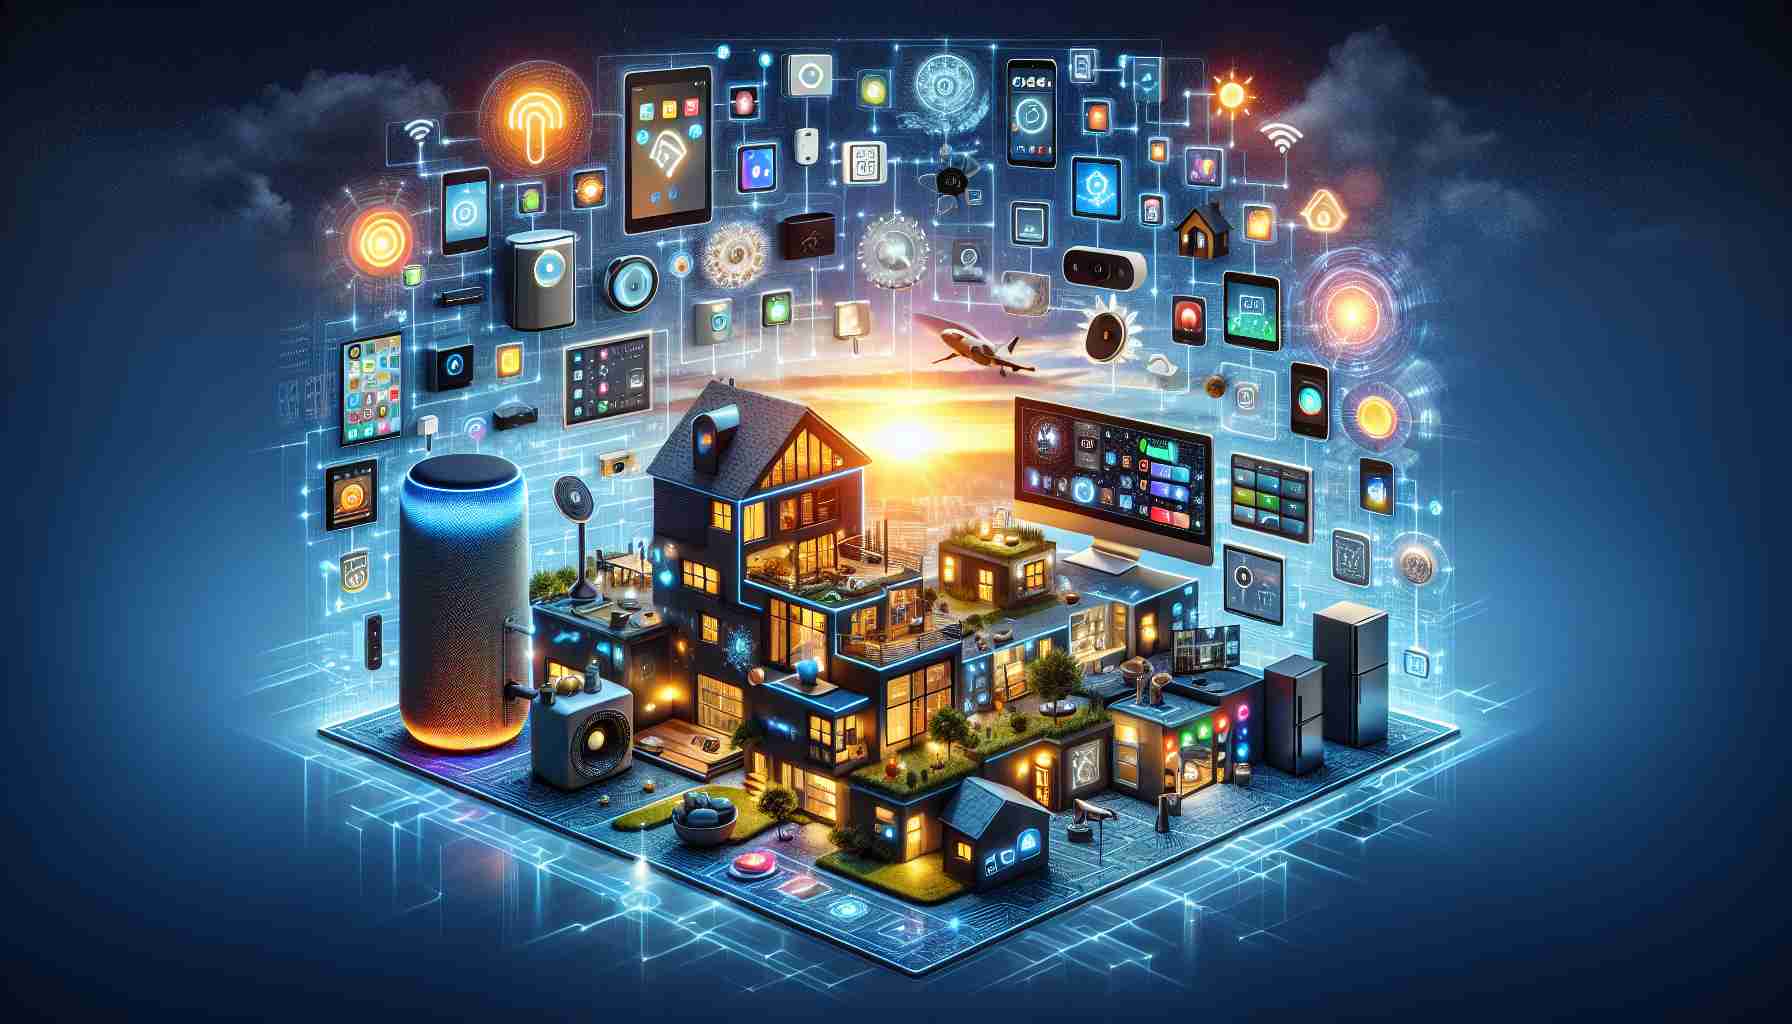 The Dawn of Unified Smart Home Ecosystems